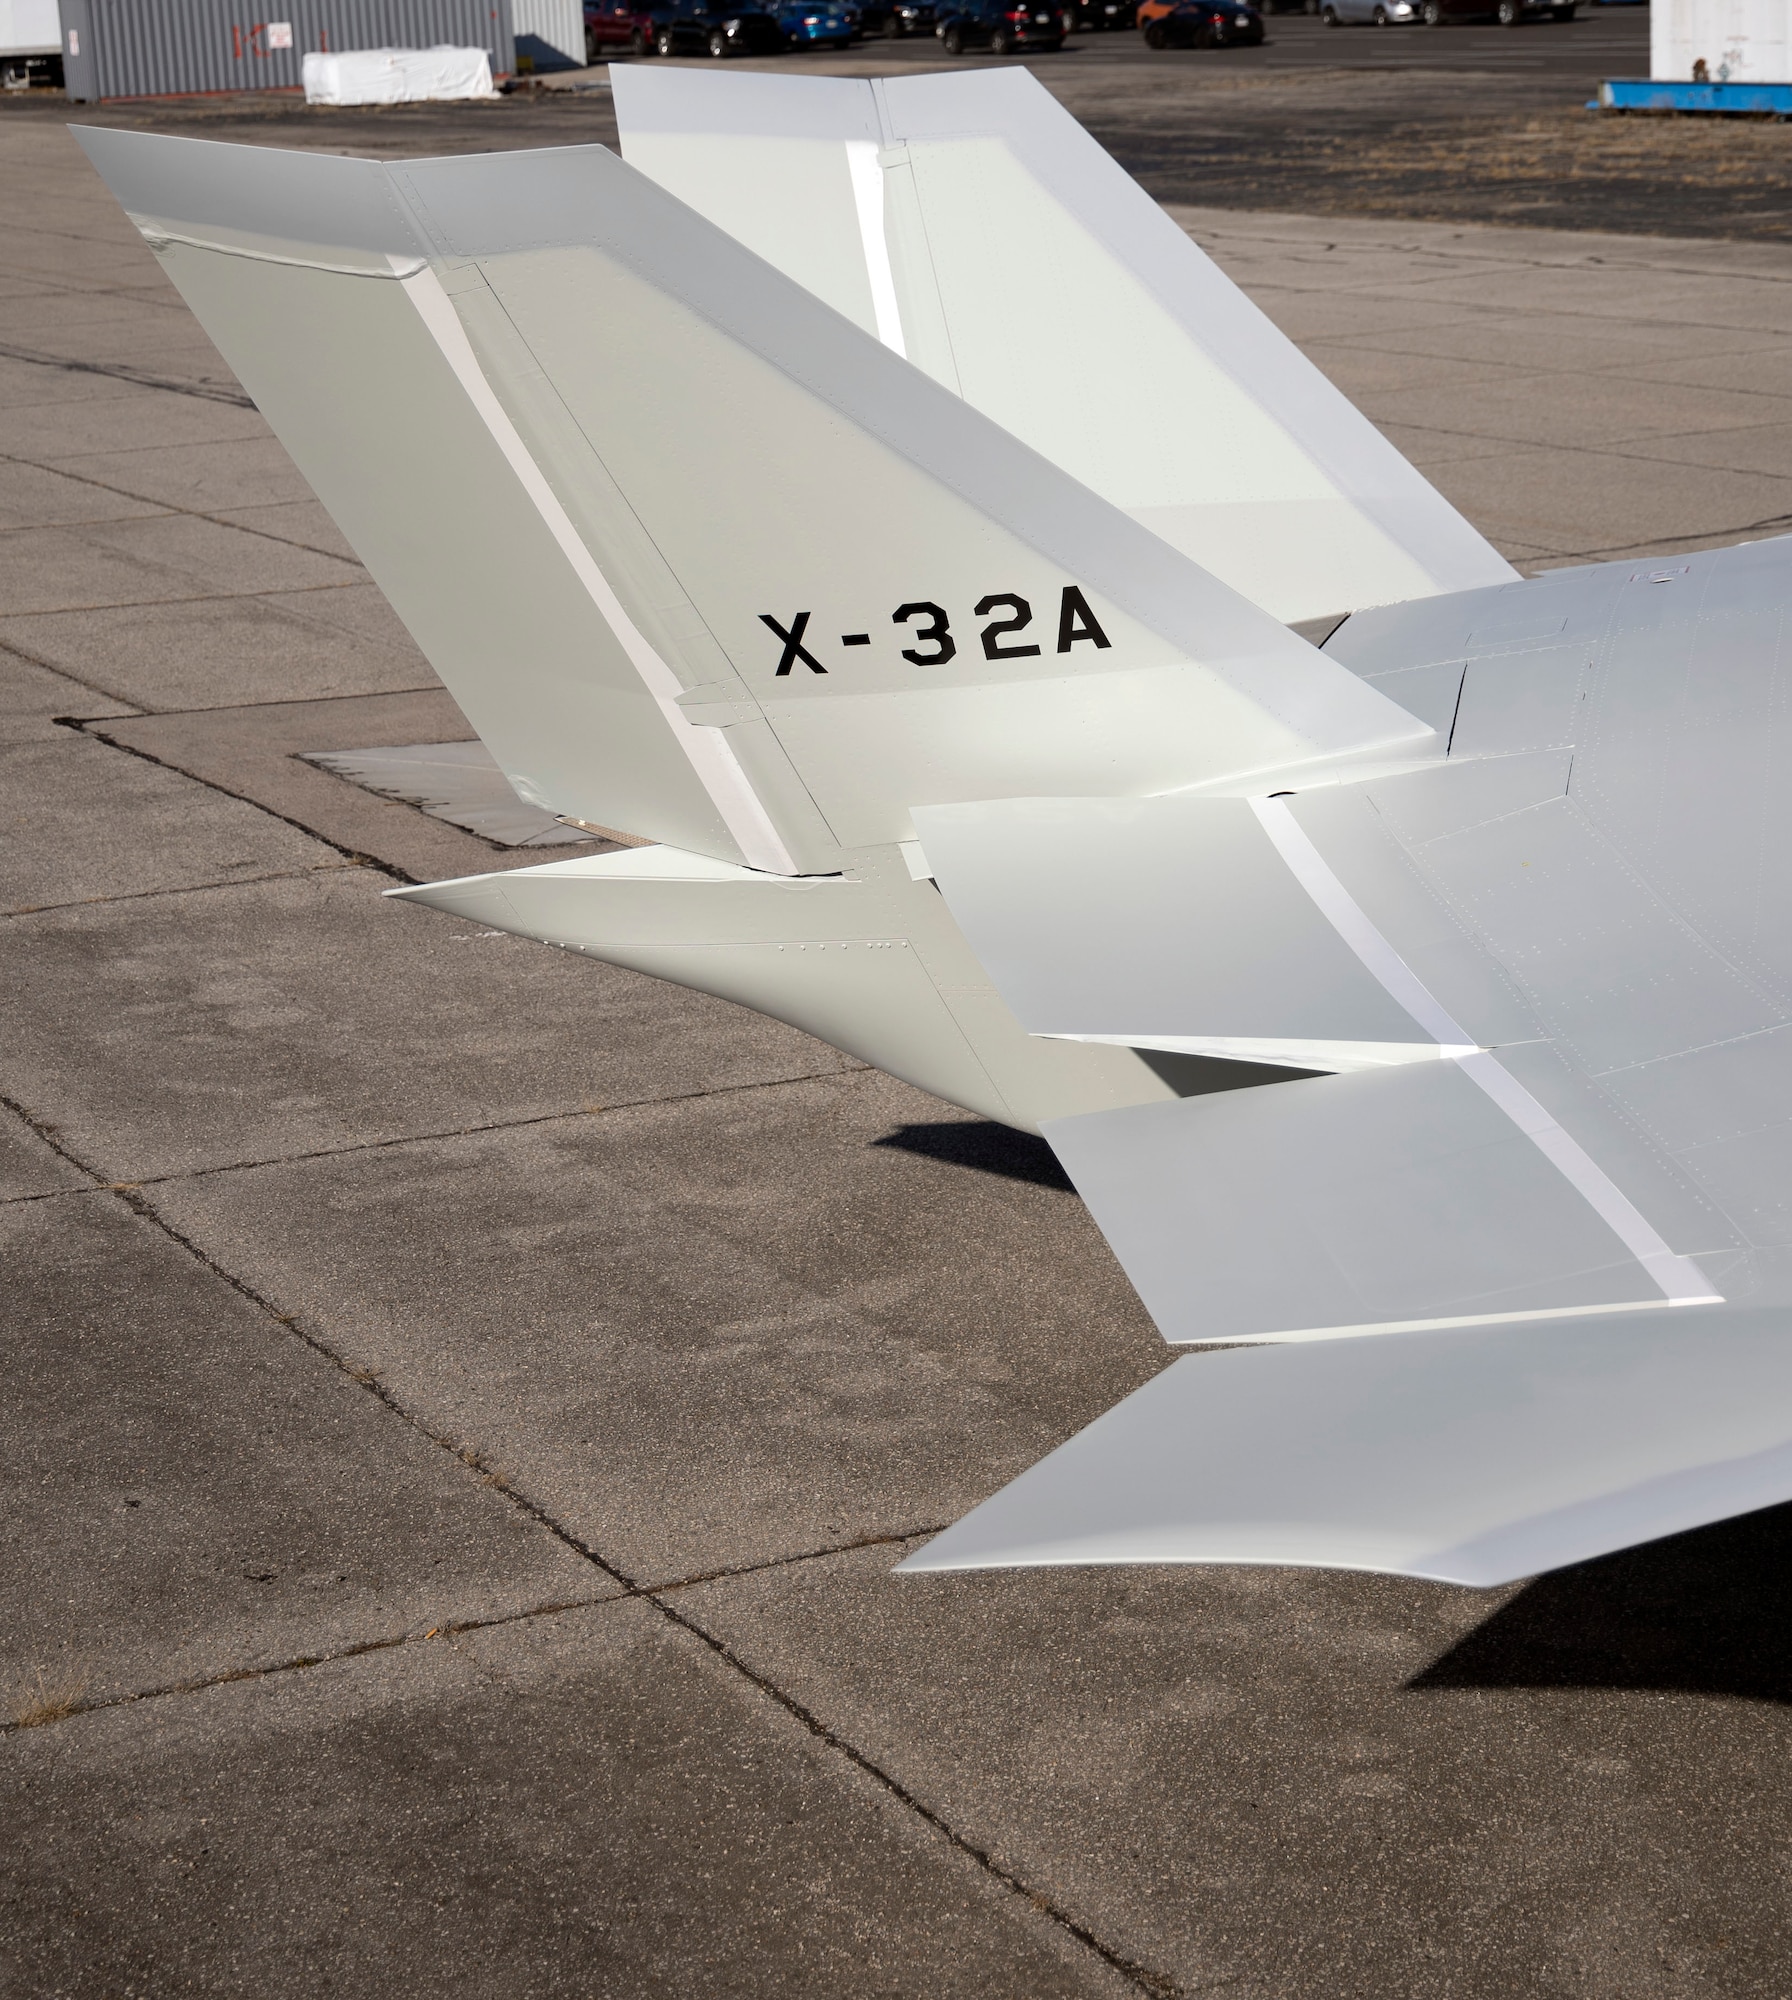 Boeing X-32A > National Museum of the United States Air Force